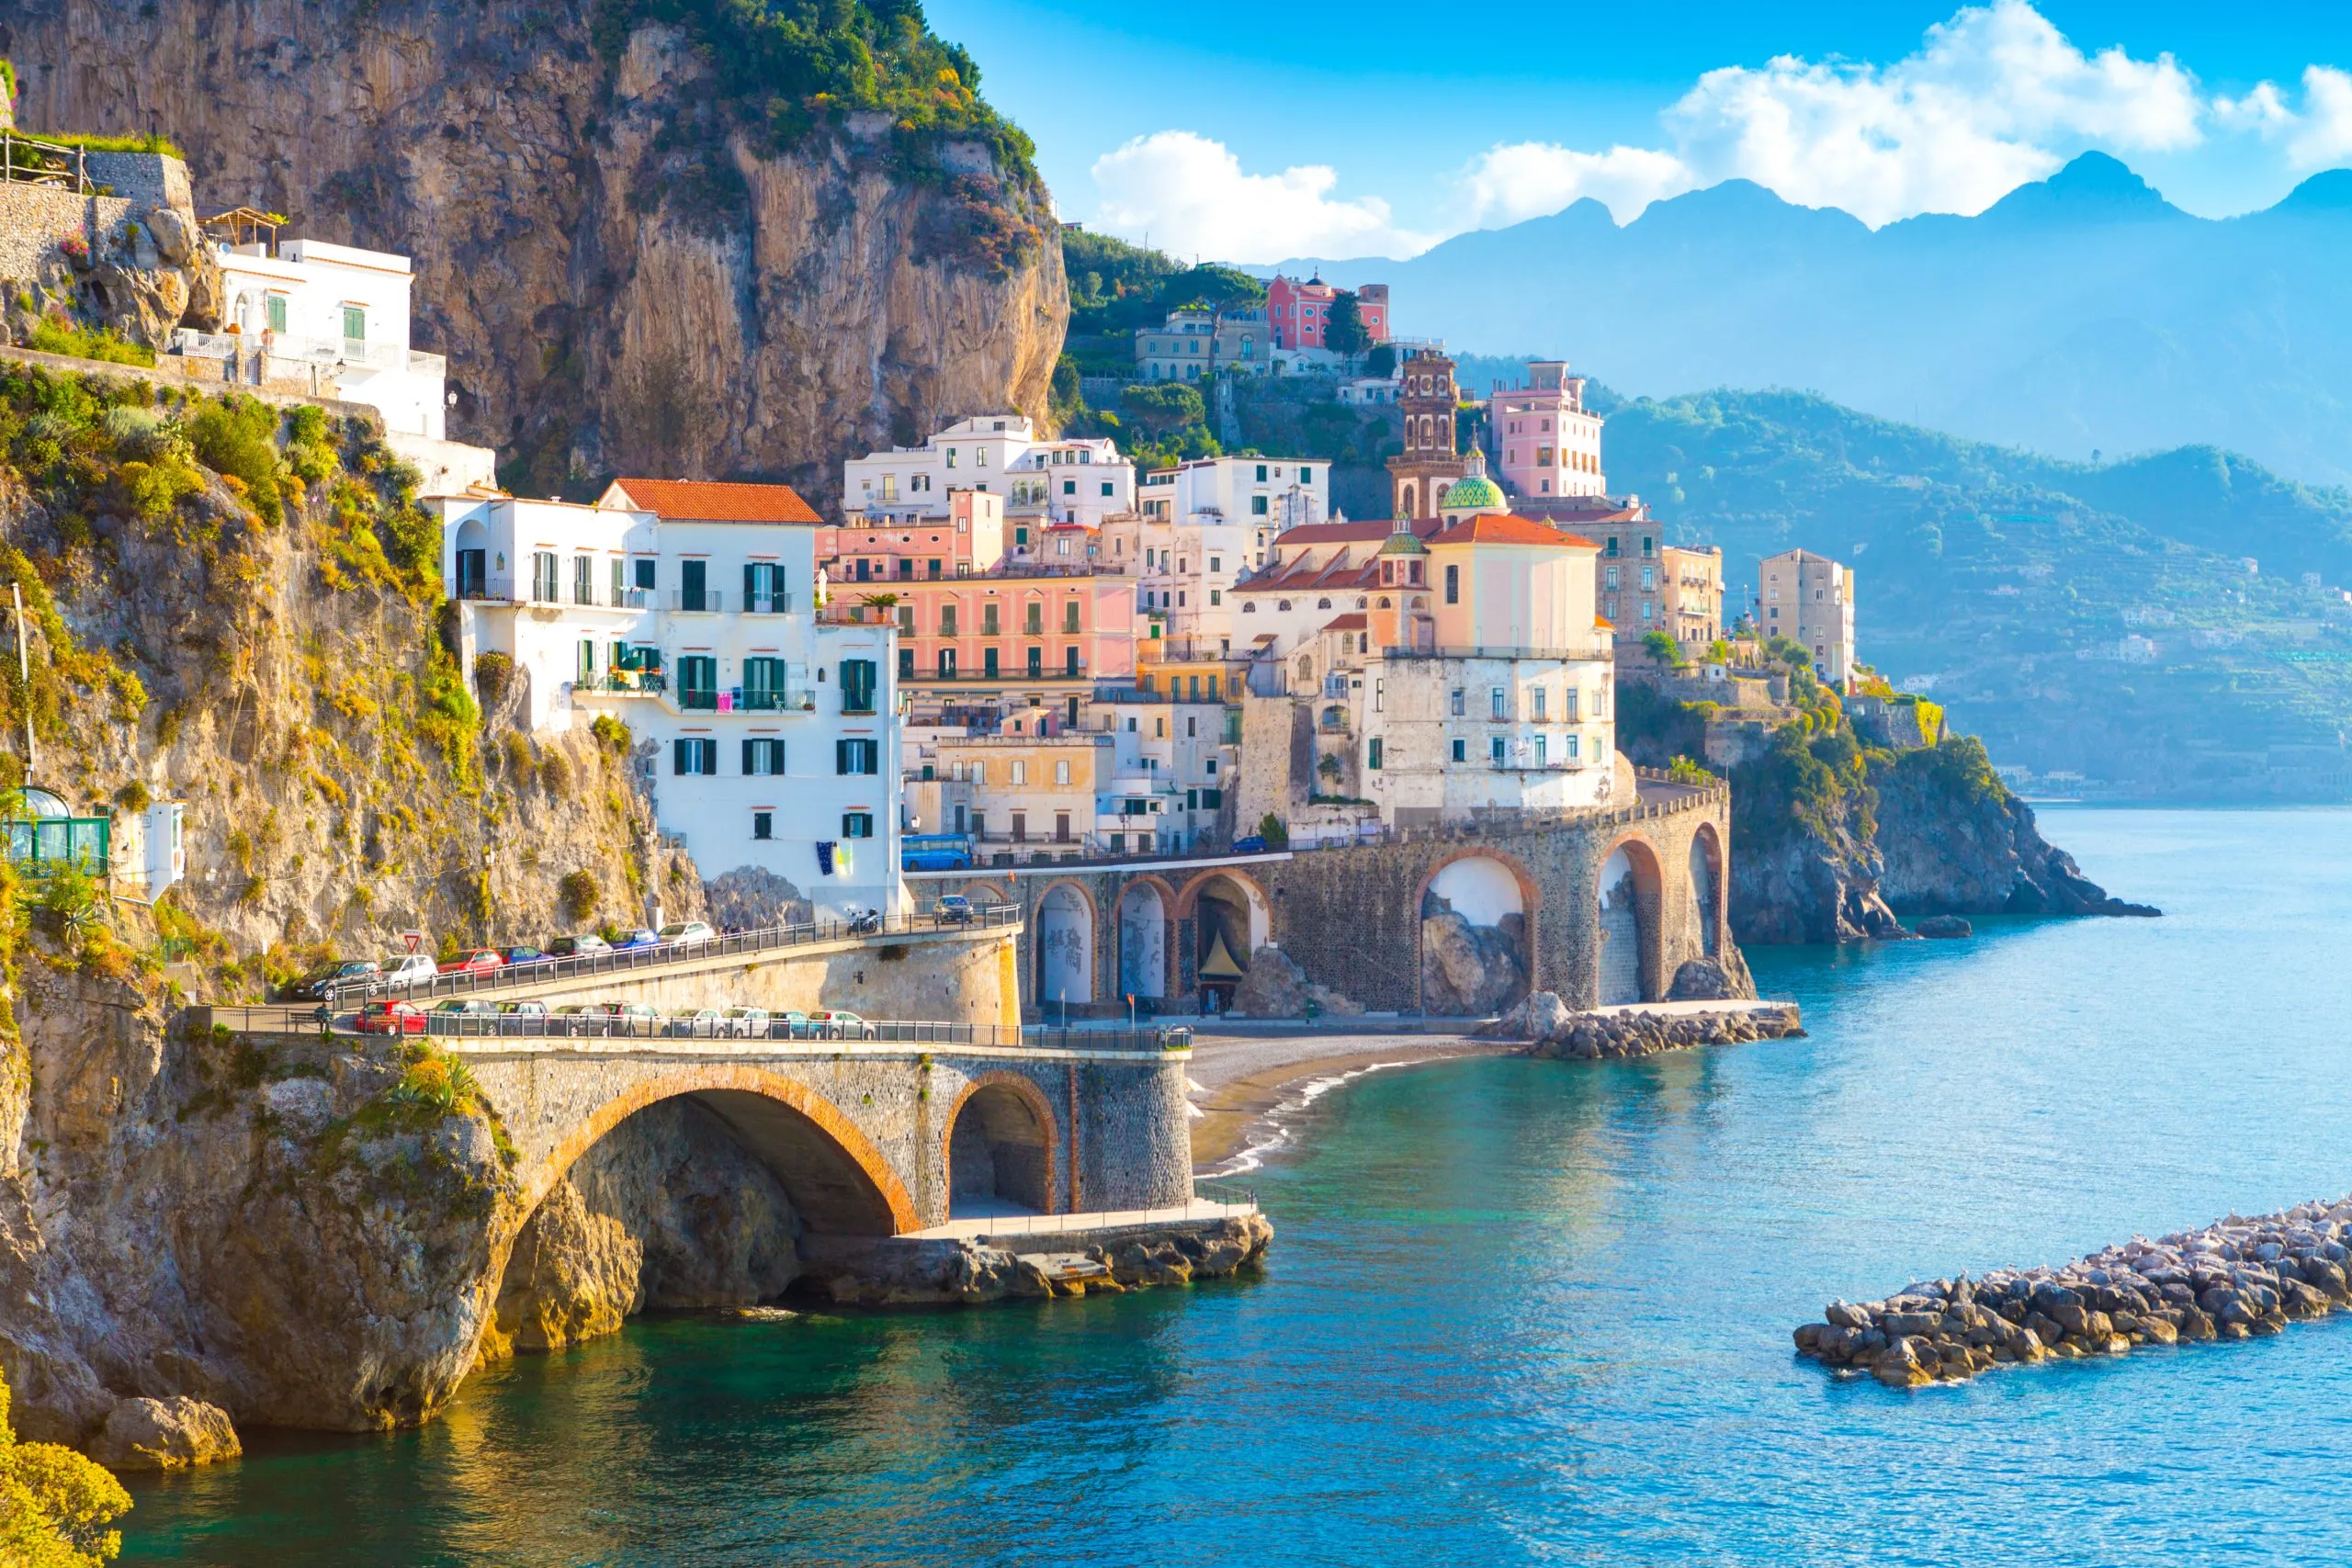 View of the Amalfi Coast with the sea to the right and a village on the left. The beautiful Amalfi Coast is one of the best places to visit in Italy.